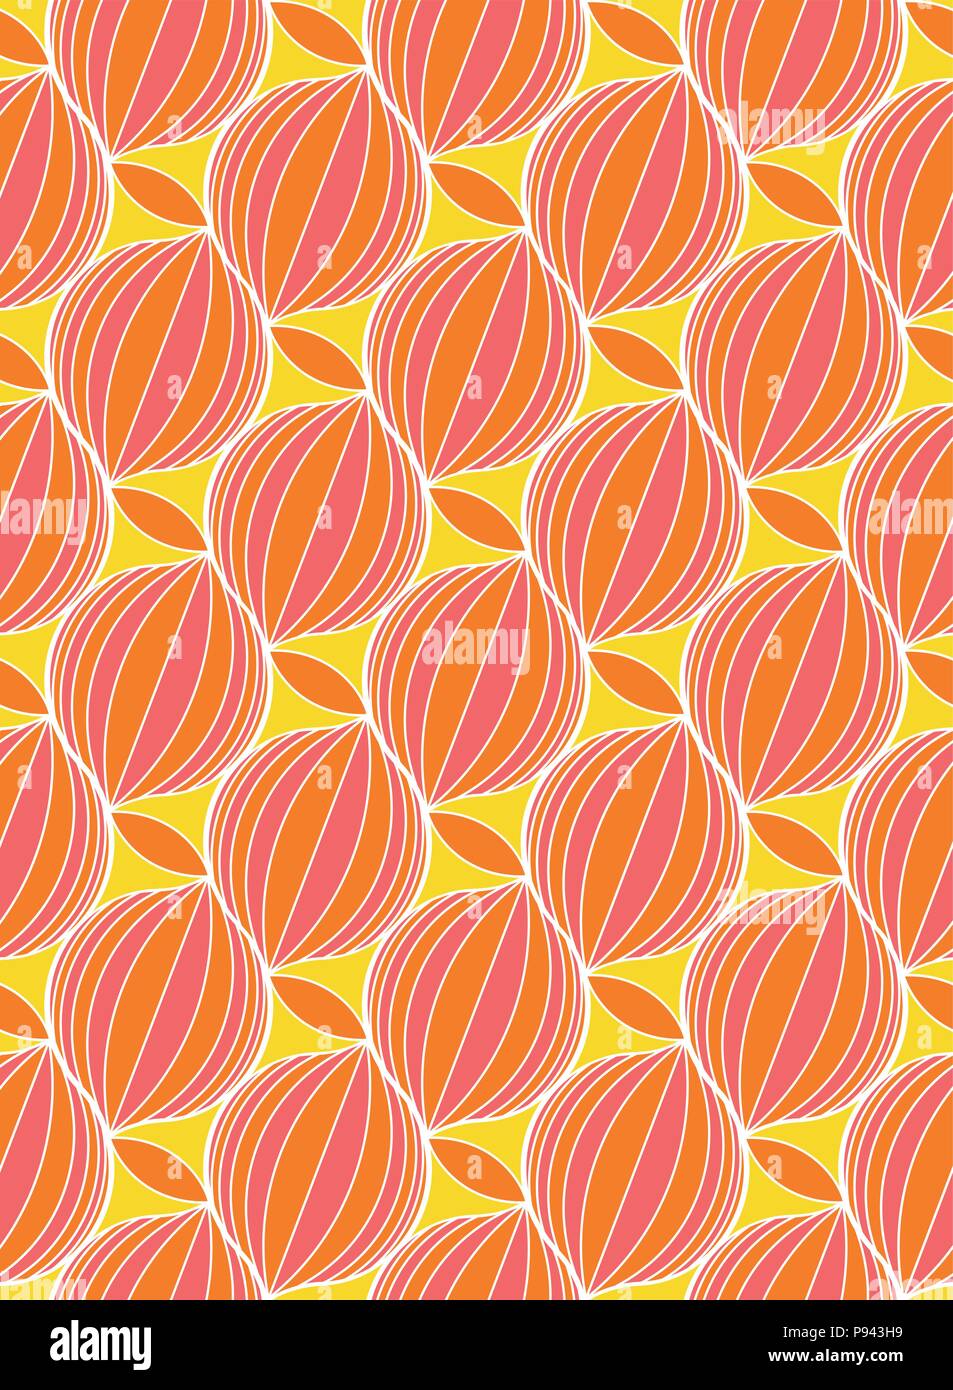 Seamless vector abstract watermelon geometric colorful modern pattern. Orange, yellow and red colors. Stock Vector